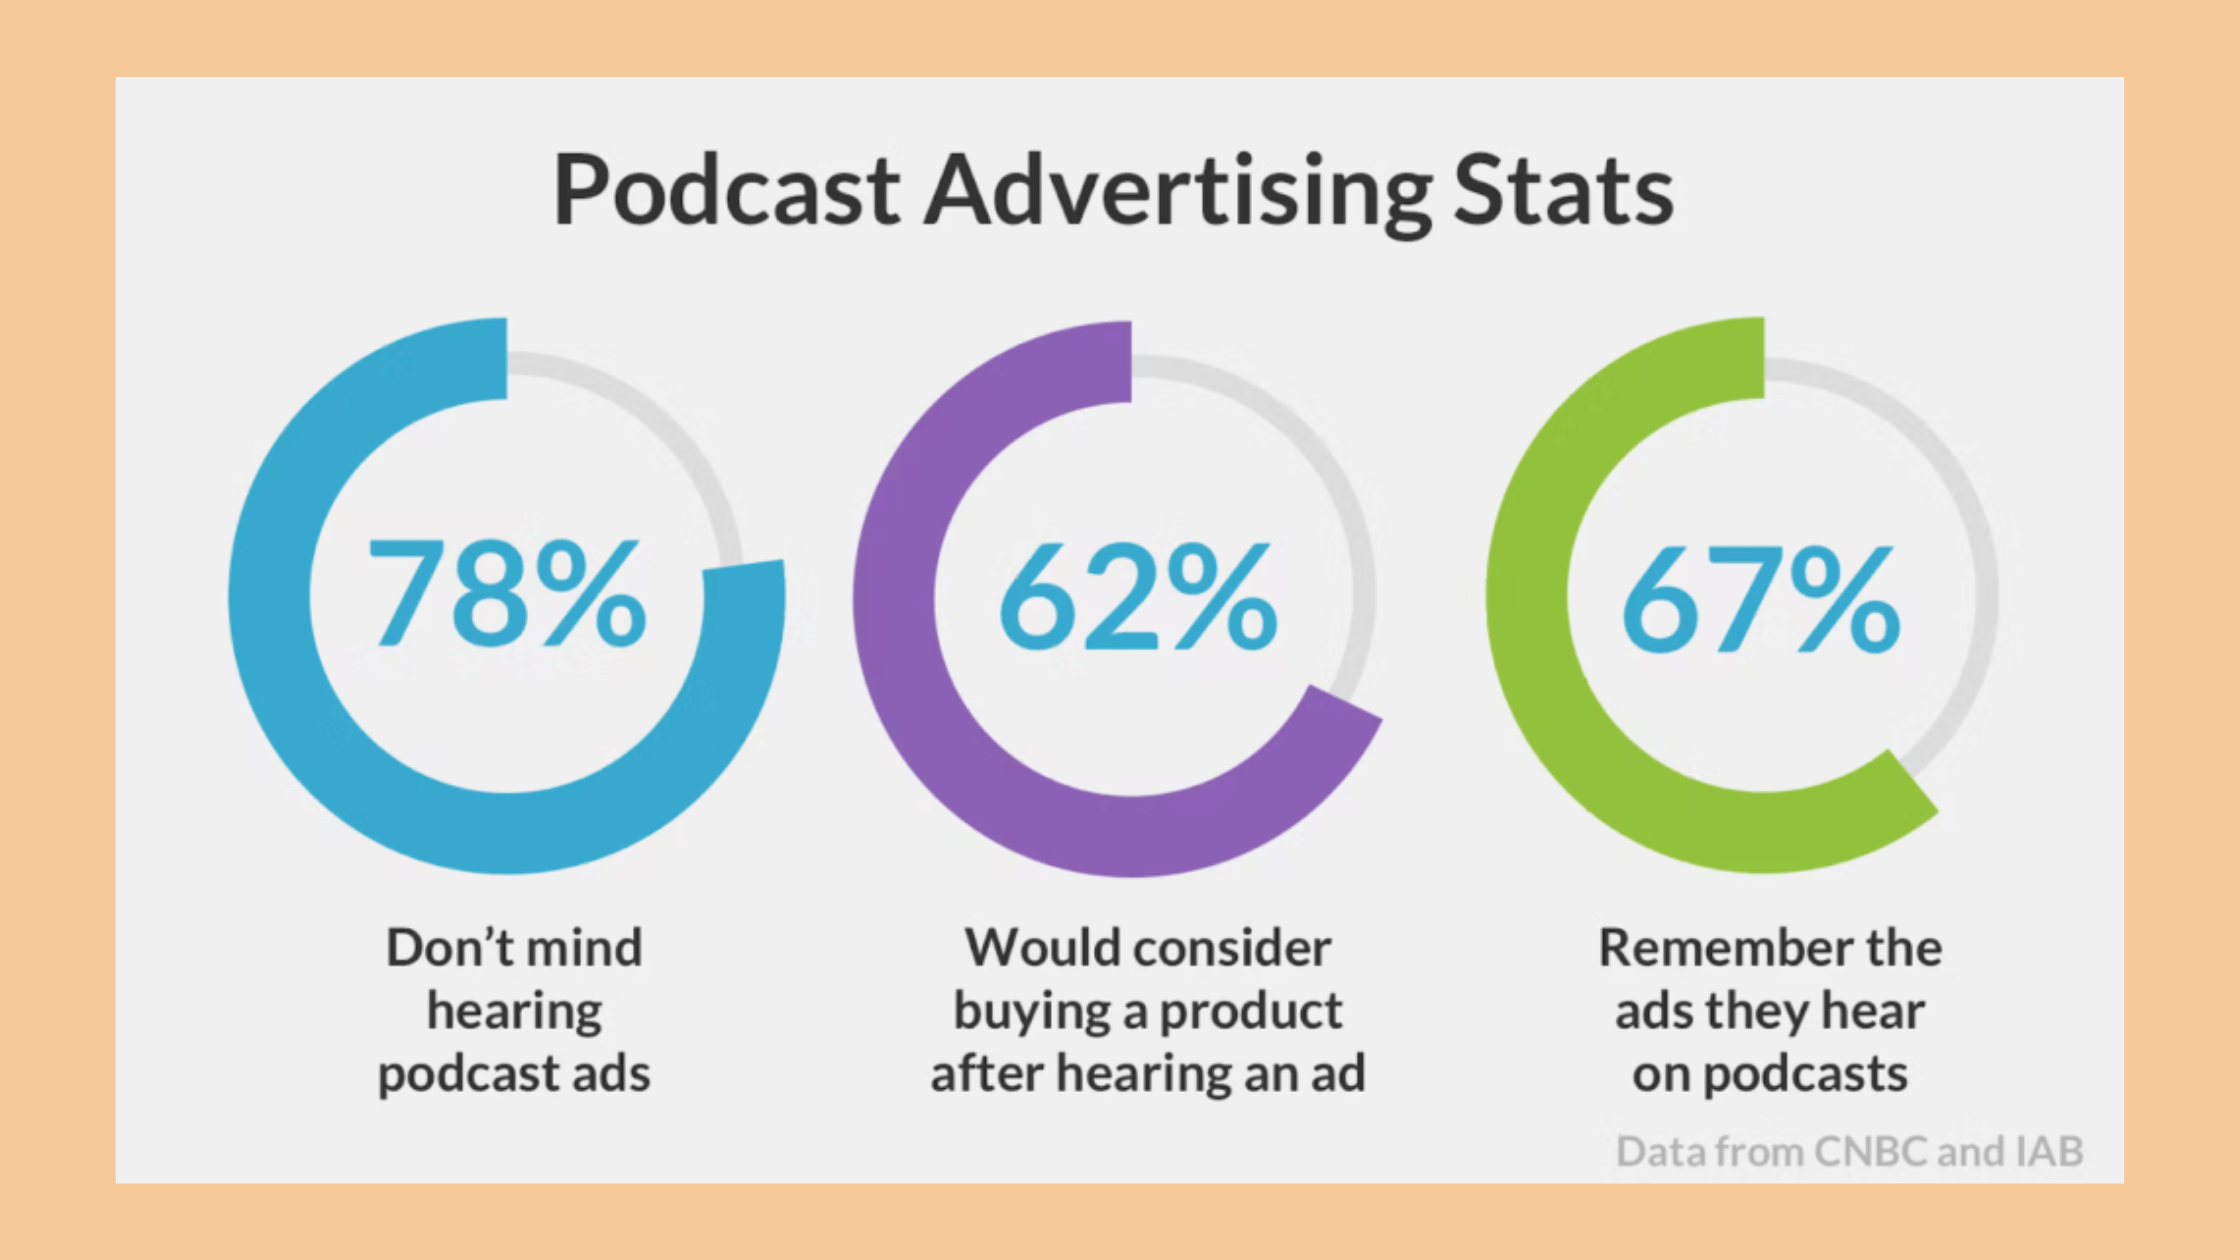 Podcast advertising stats